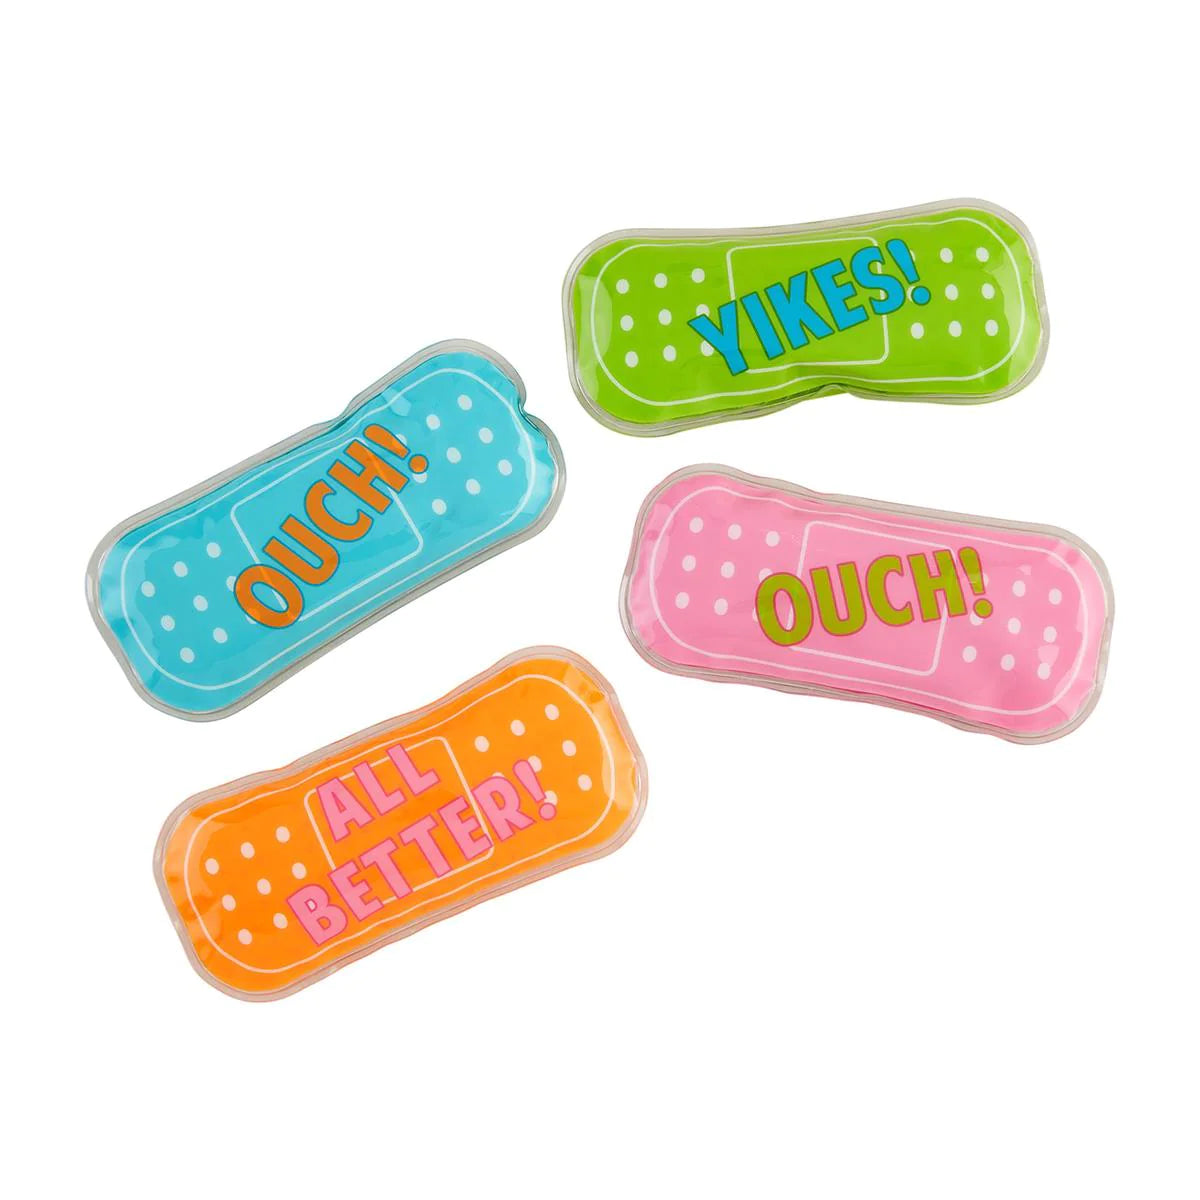 Mudpie- Bright Bandage Ouch Pouches